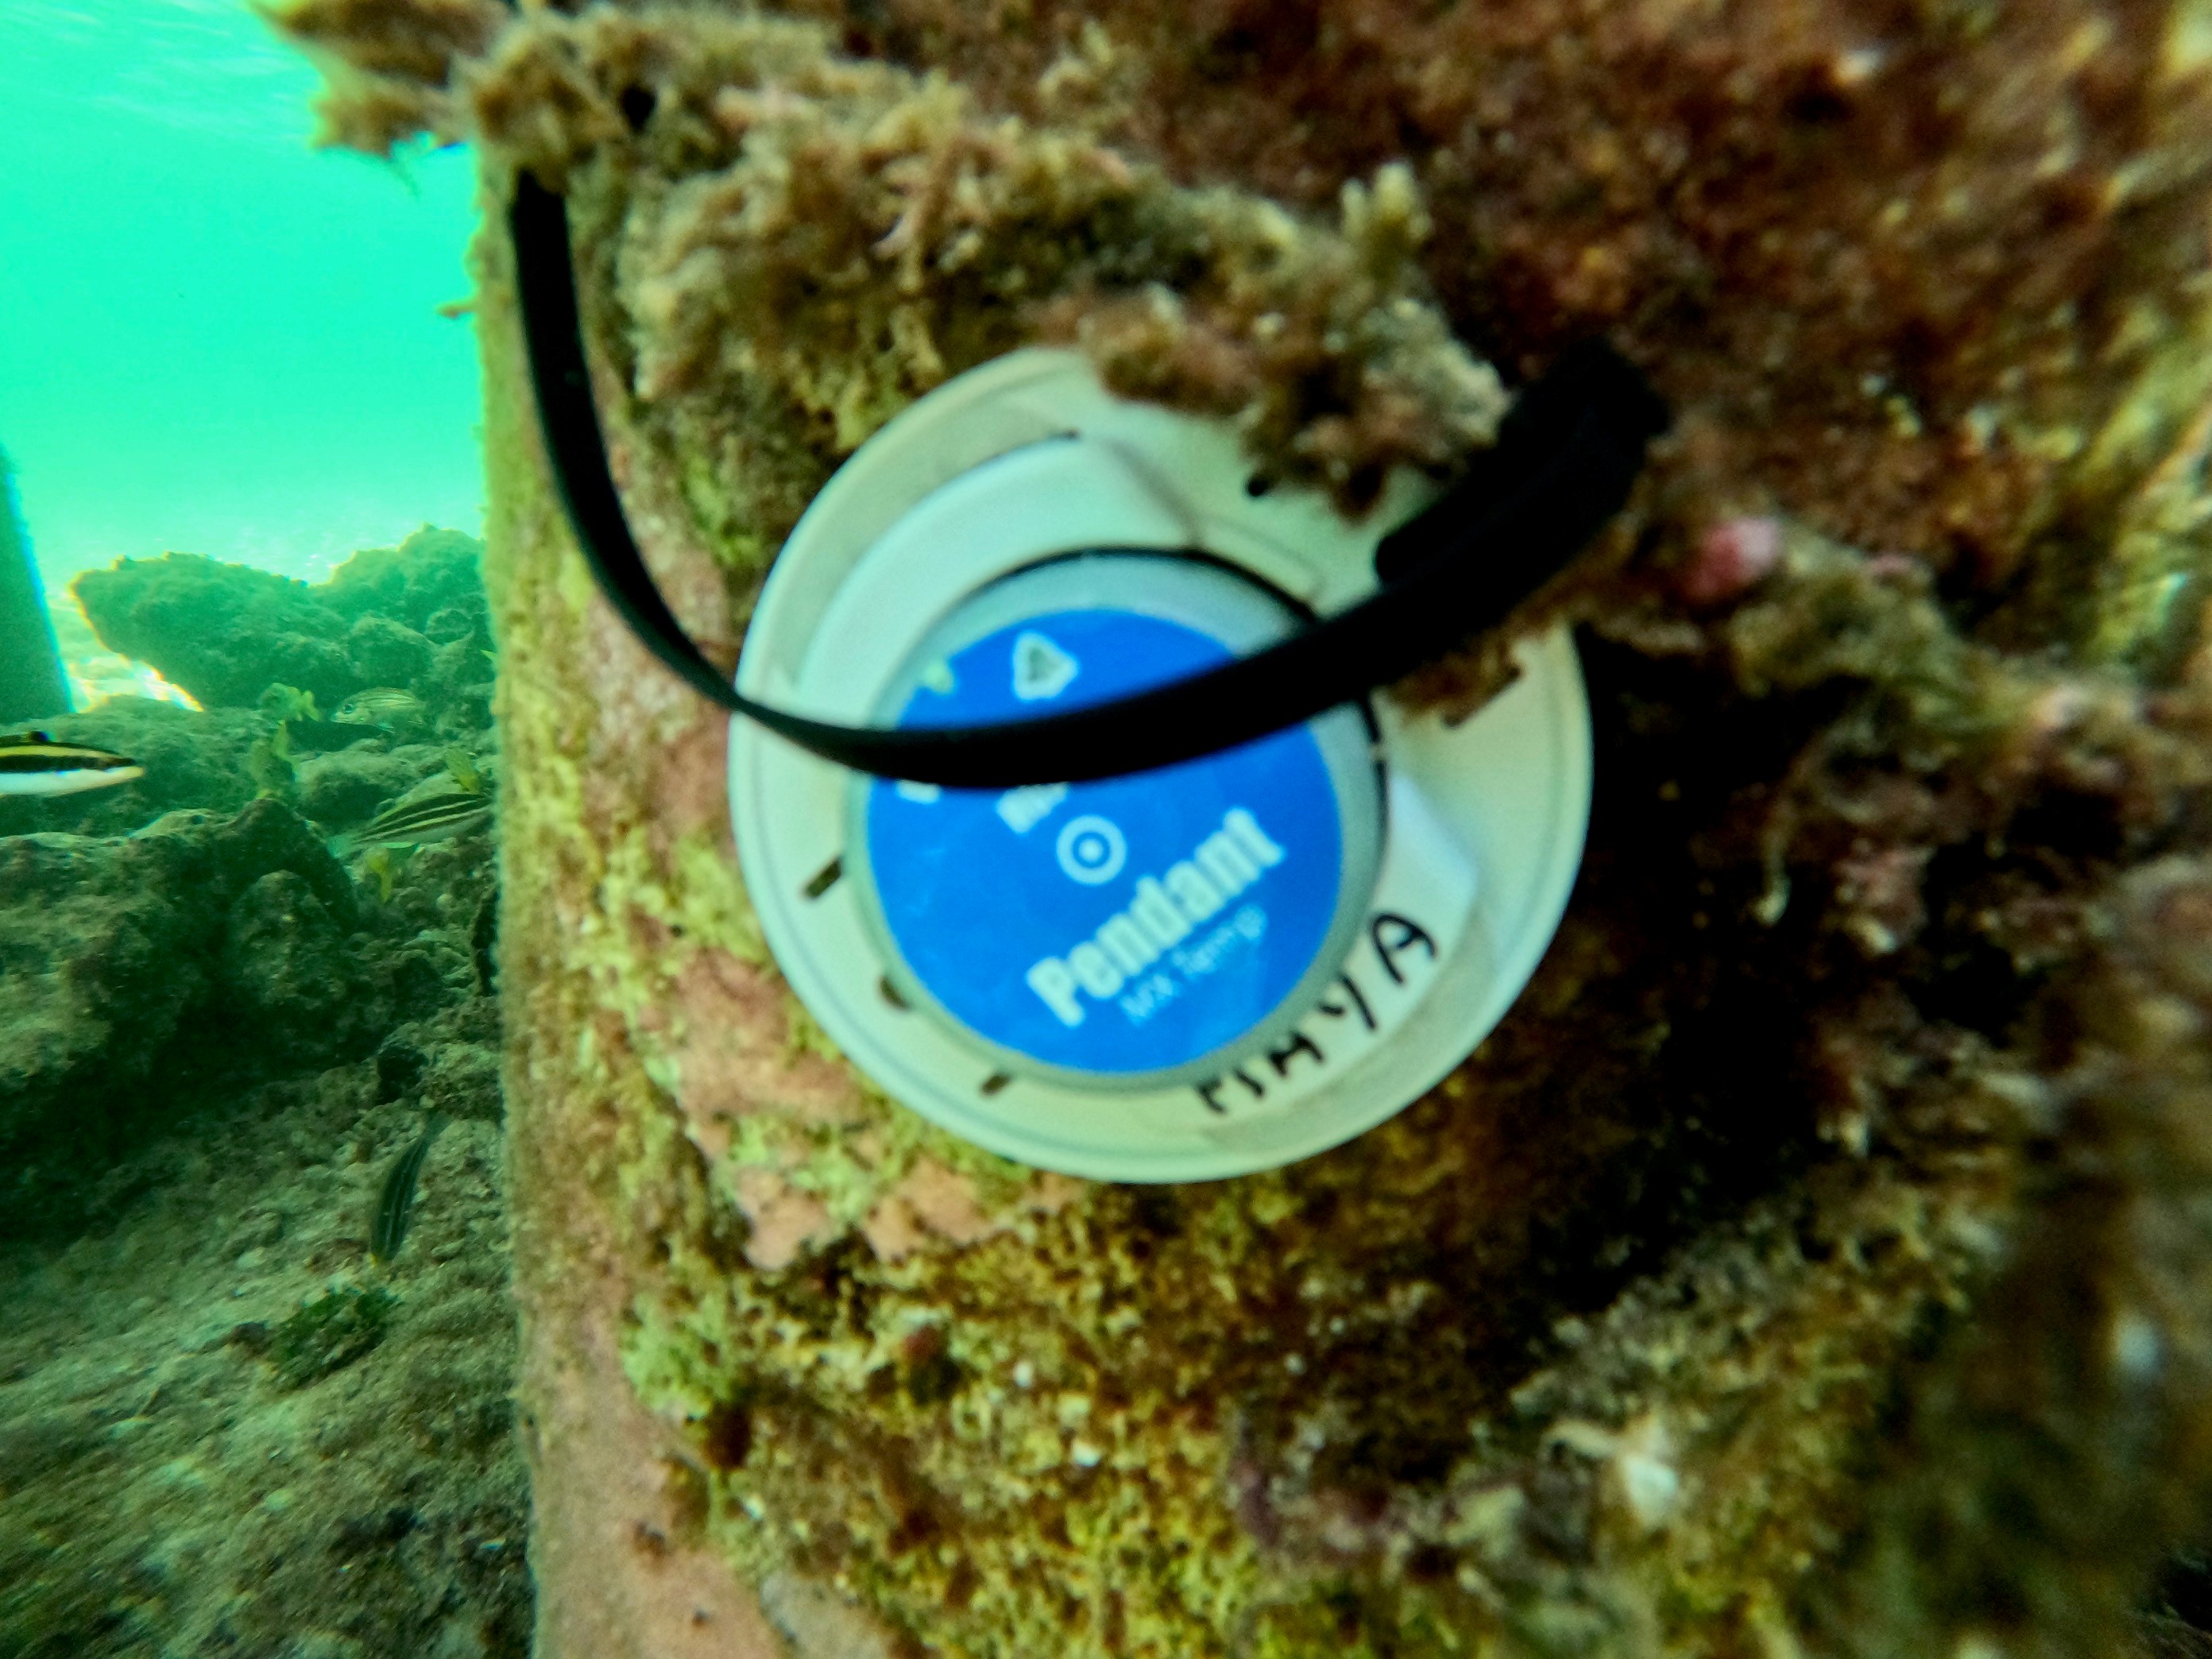 Temperature sensors were placed at several locations in Roatan and will monitor water temperature over the course of the year.